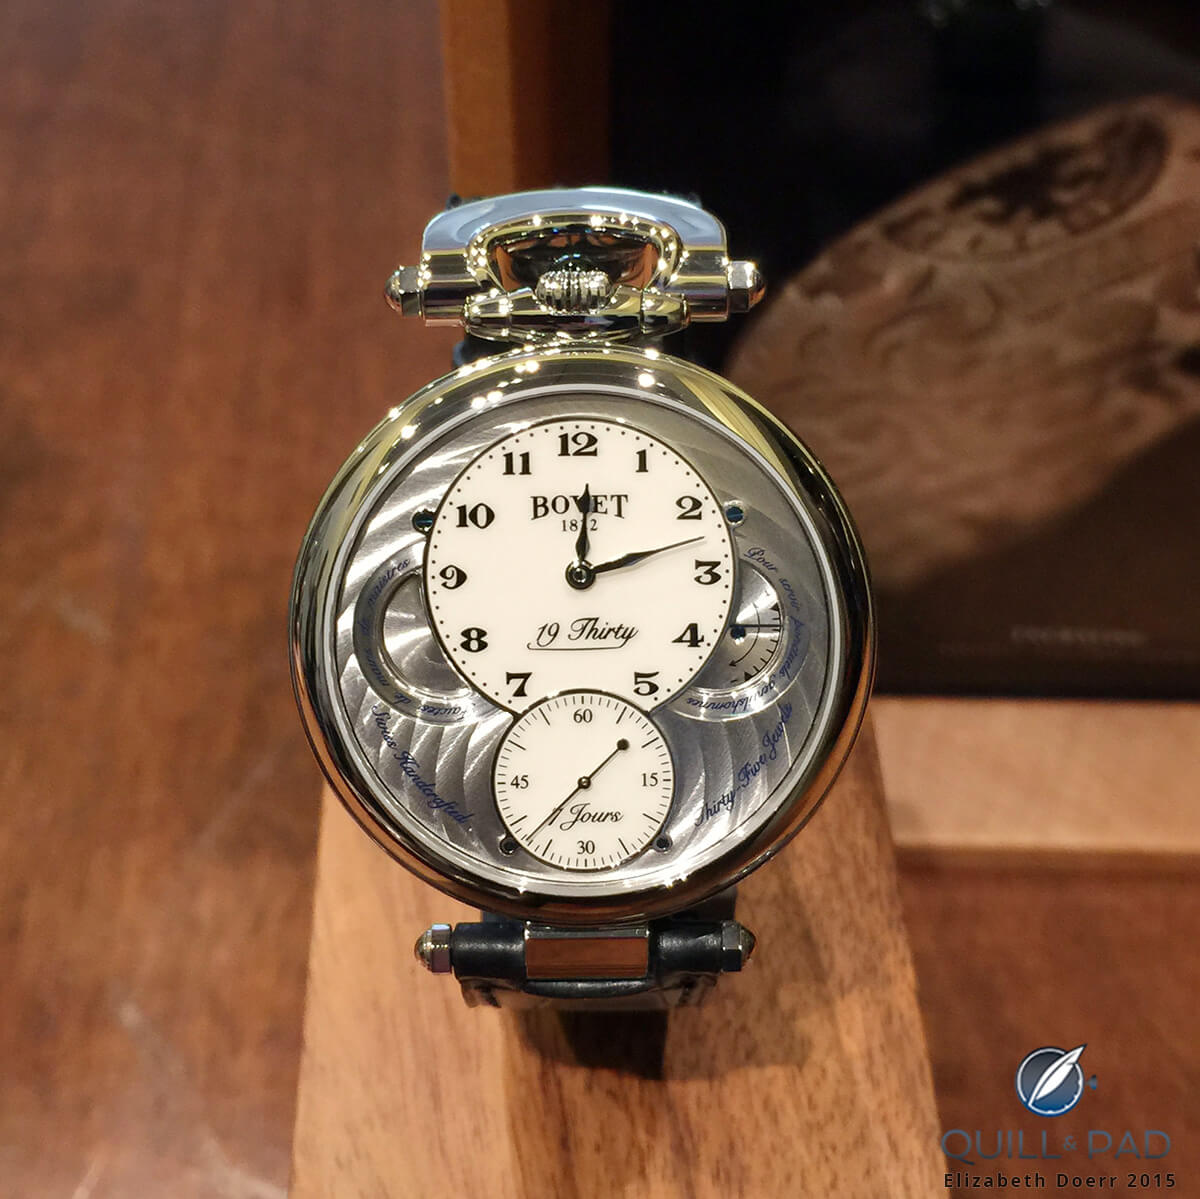 Bovet 19Thirty with ivory-colored dials